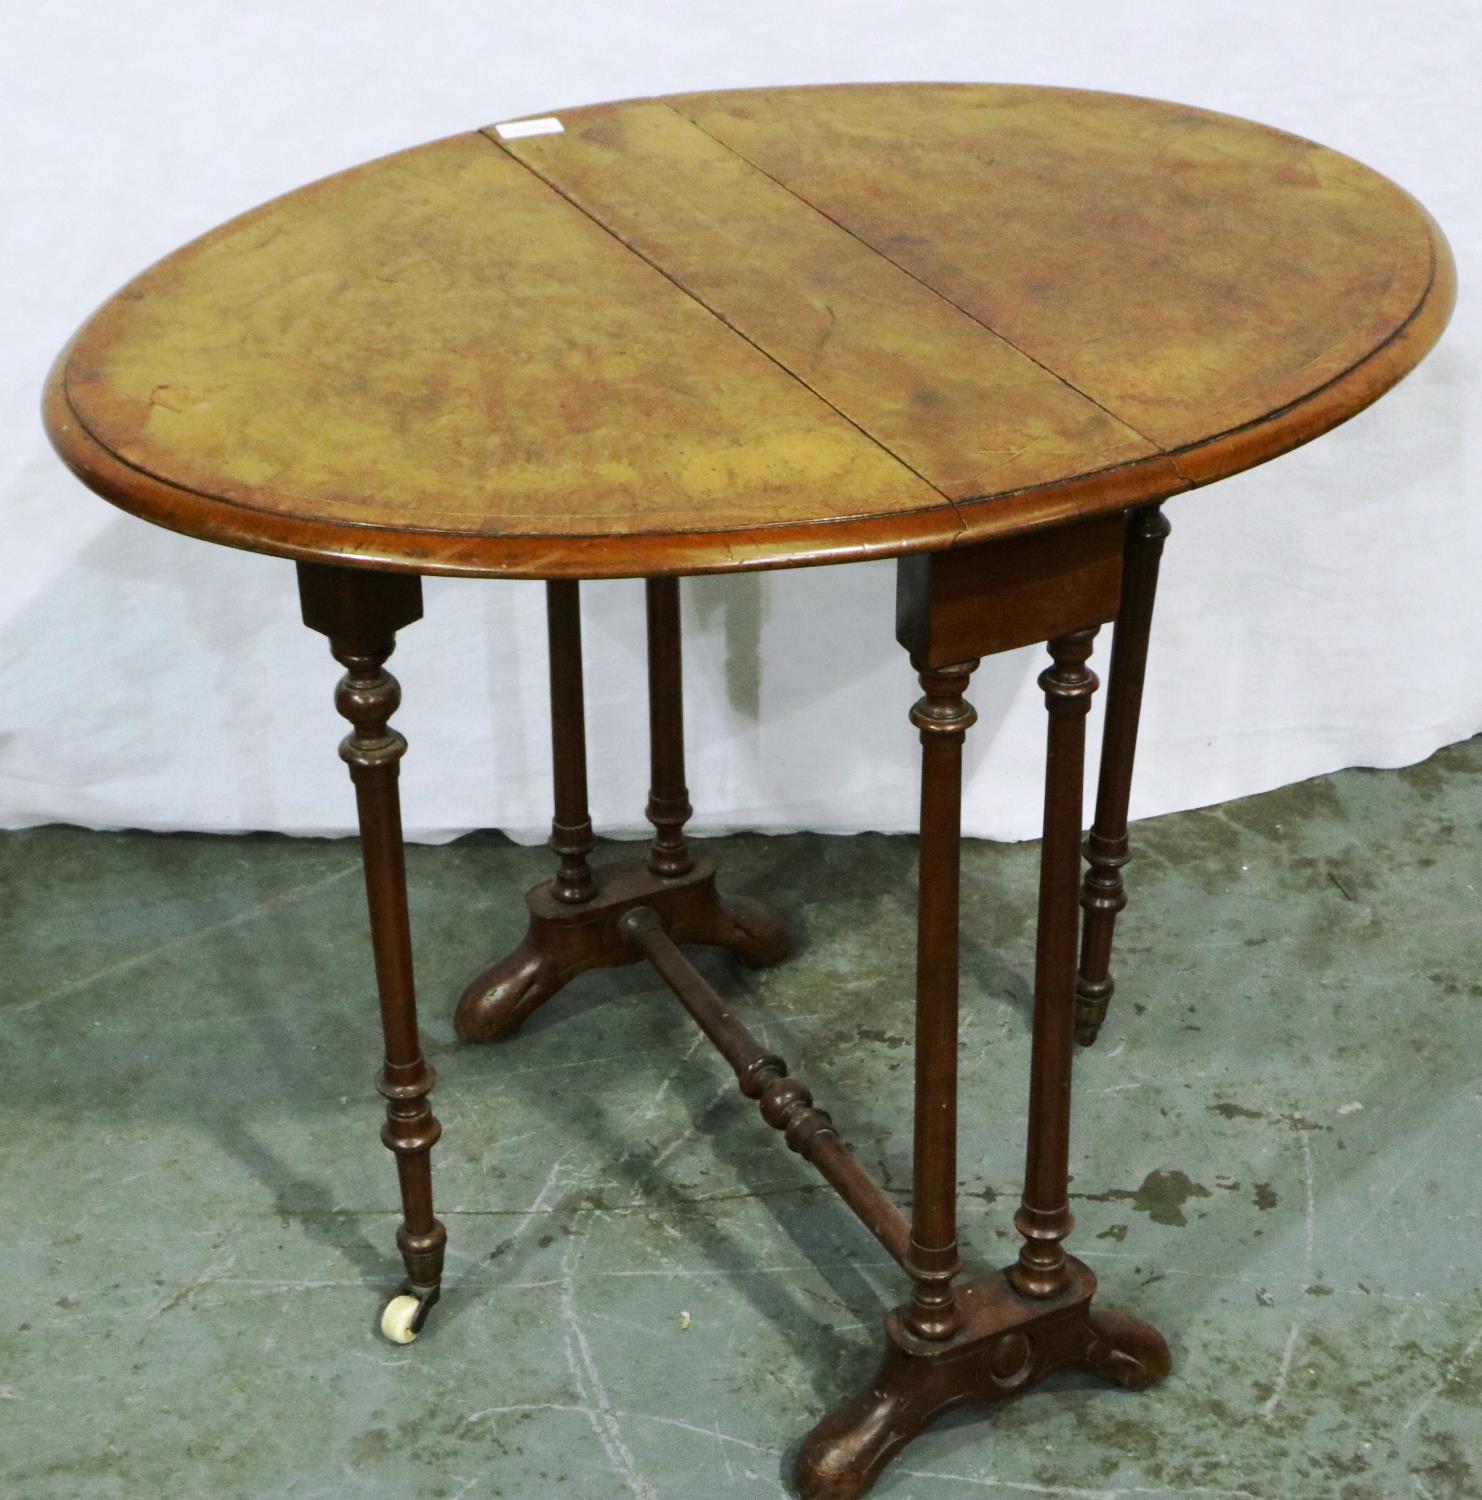 A Victorian burr walnut inlaid Sutherland table with carved and turned supports, 82 x 61 x 64 cm